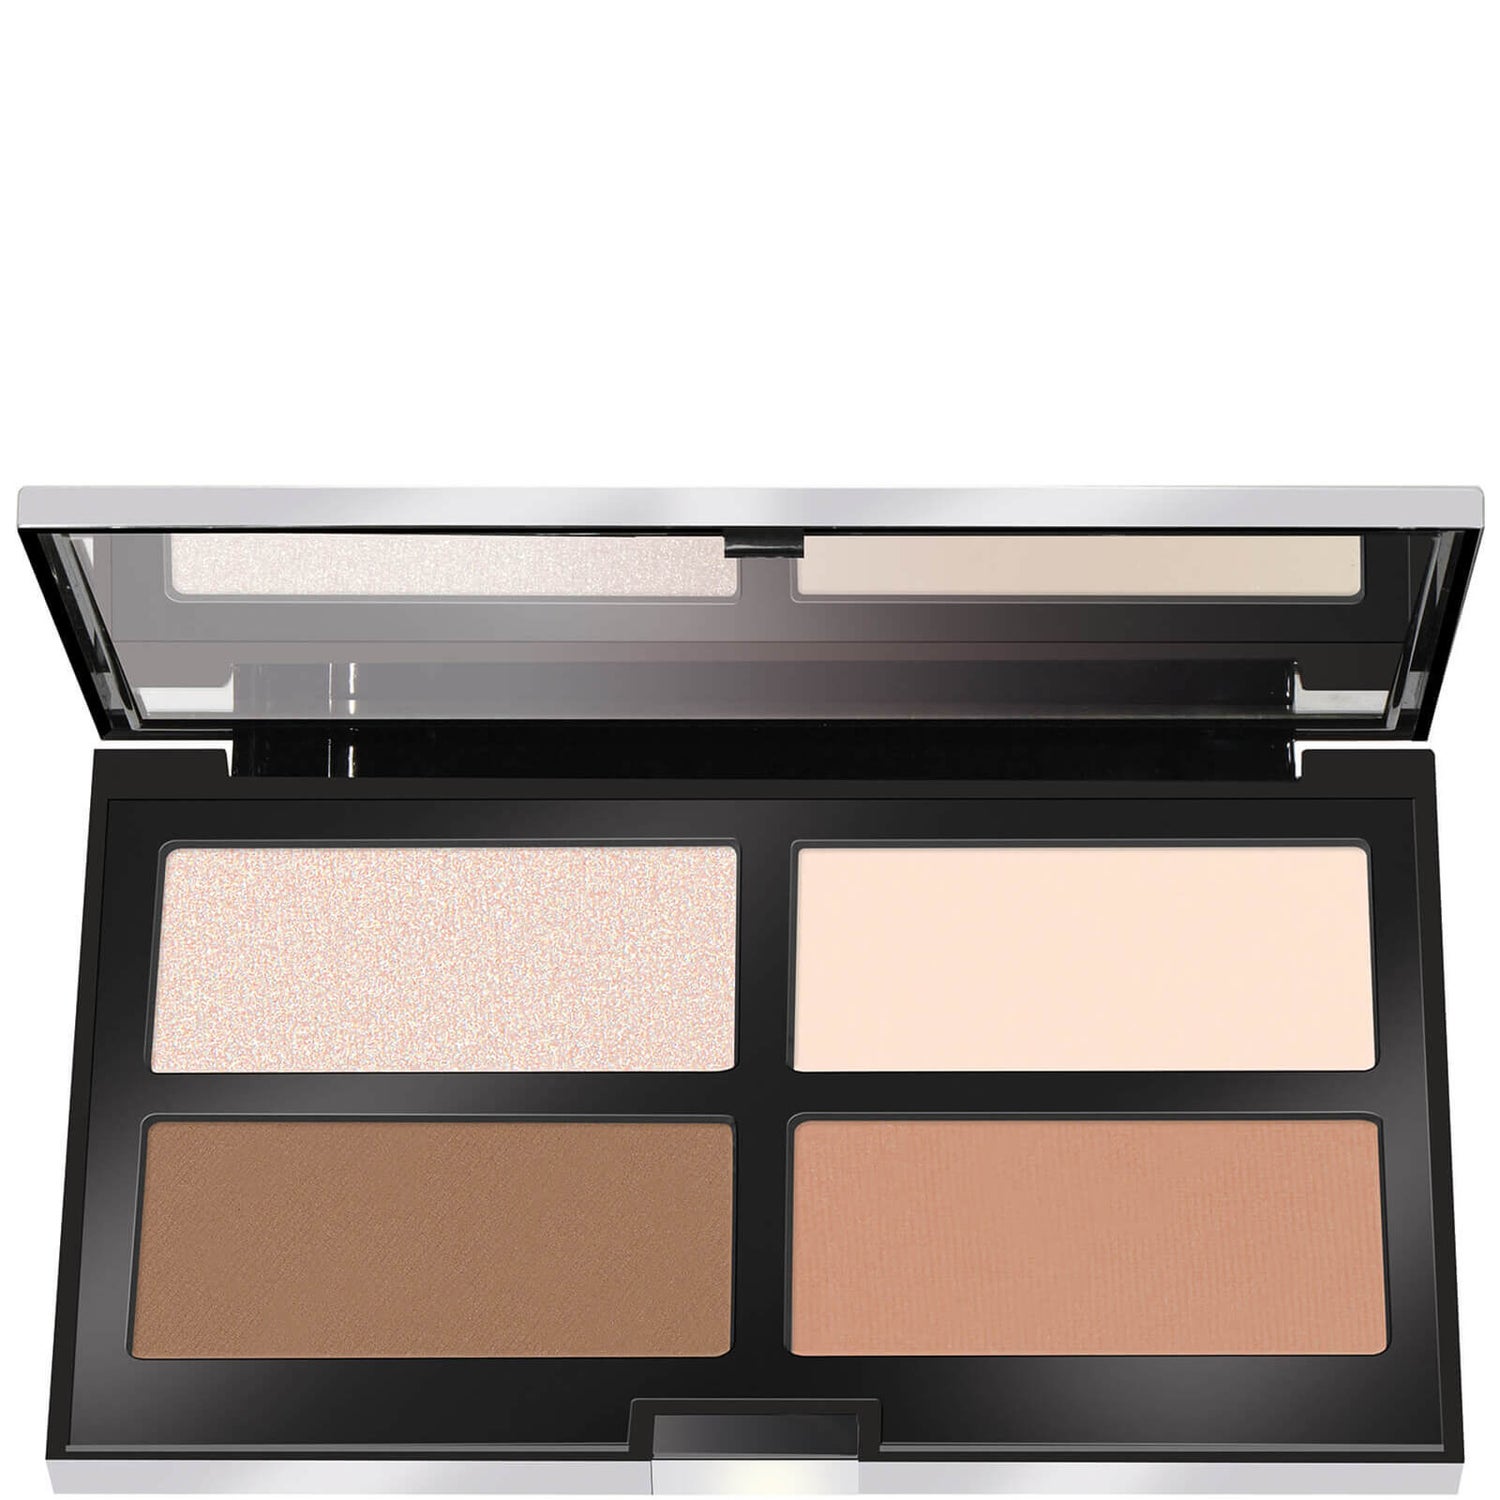 PUPA Contouring and Strobing Ready 4 Selfie Powder Palette – Light Skin 17.5 g